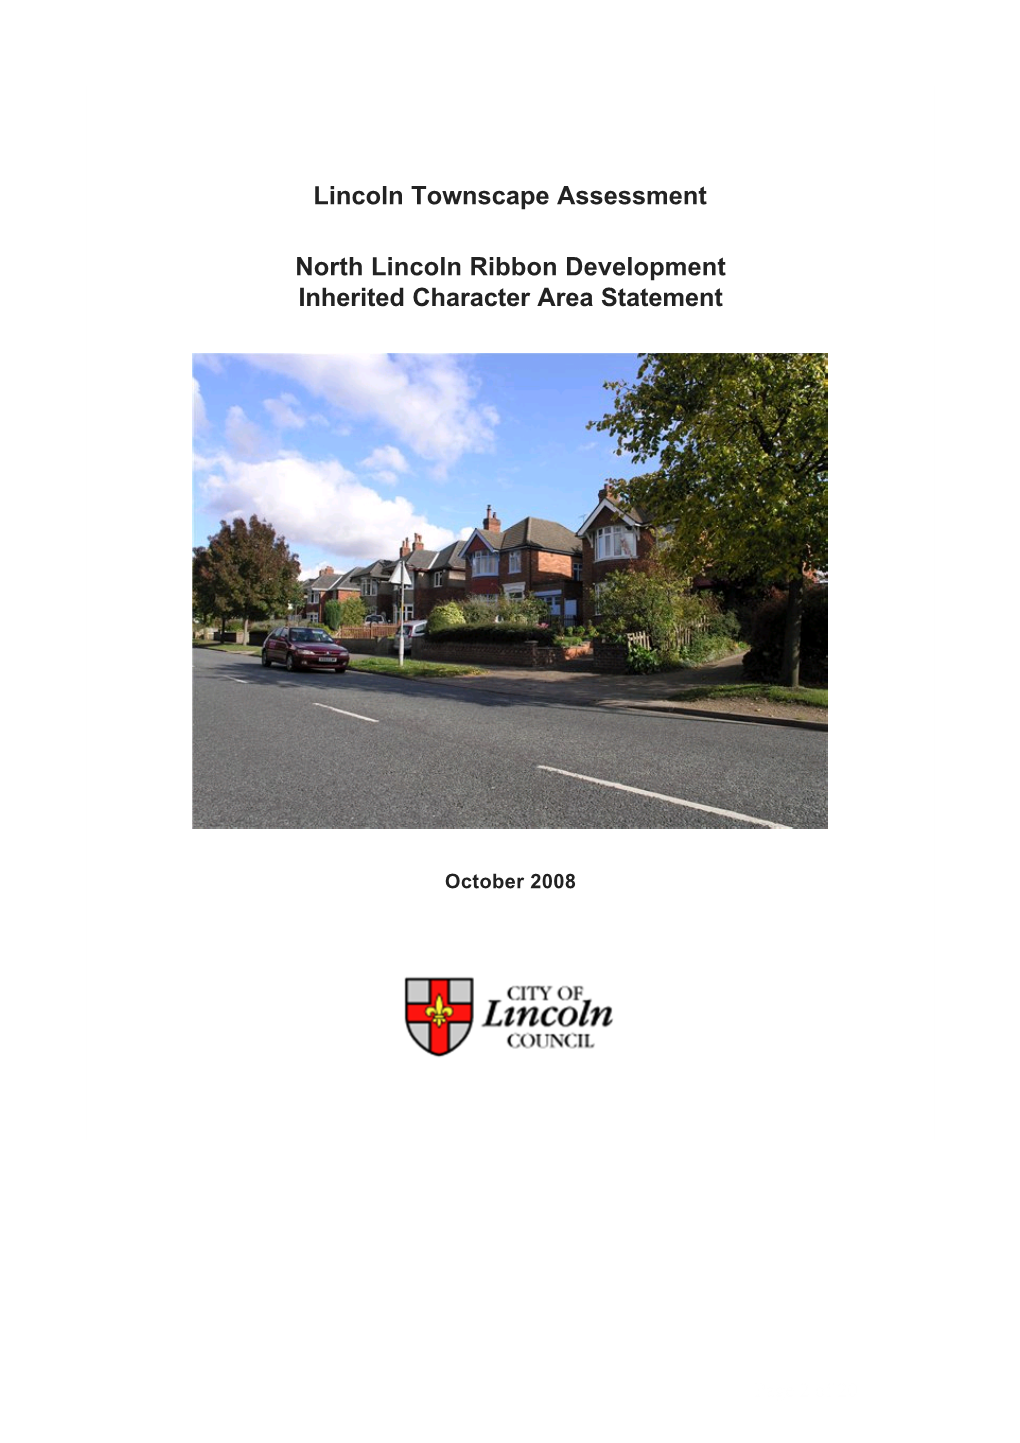 Lincoln Townscape Assessment North Lincoln Ribbon Development Inherited Character Area Statement